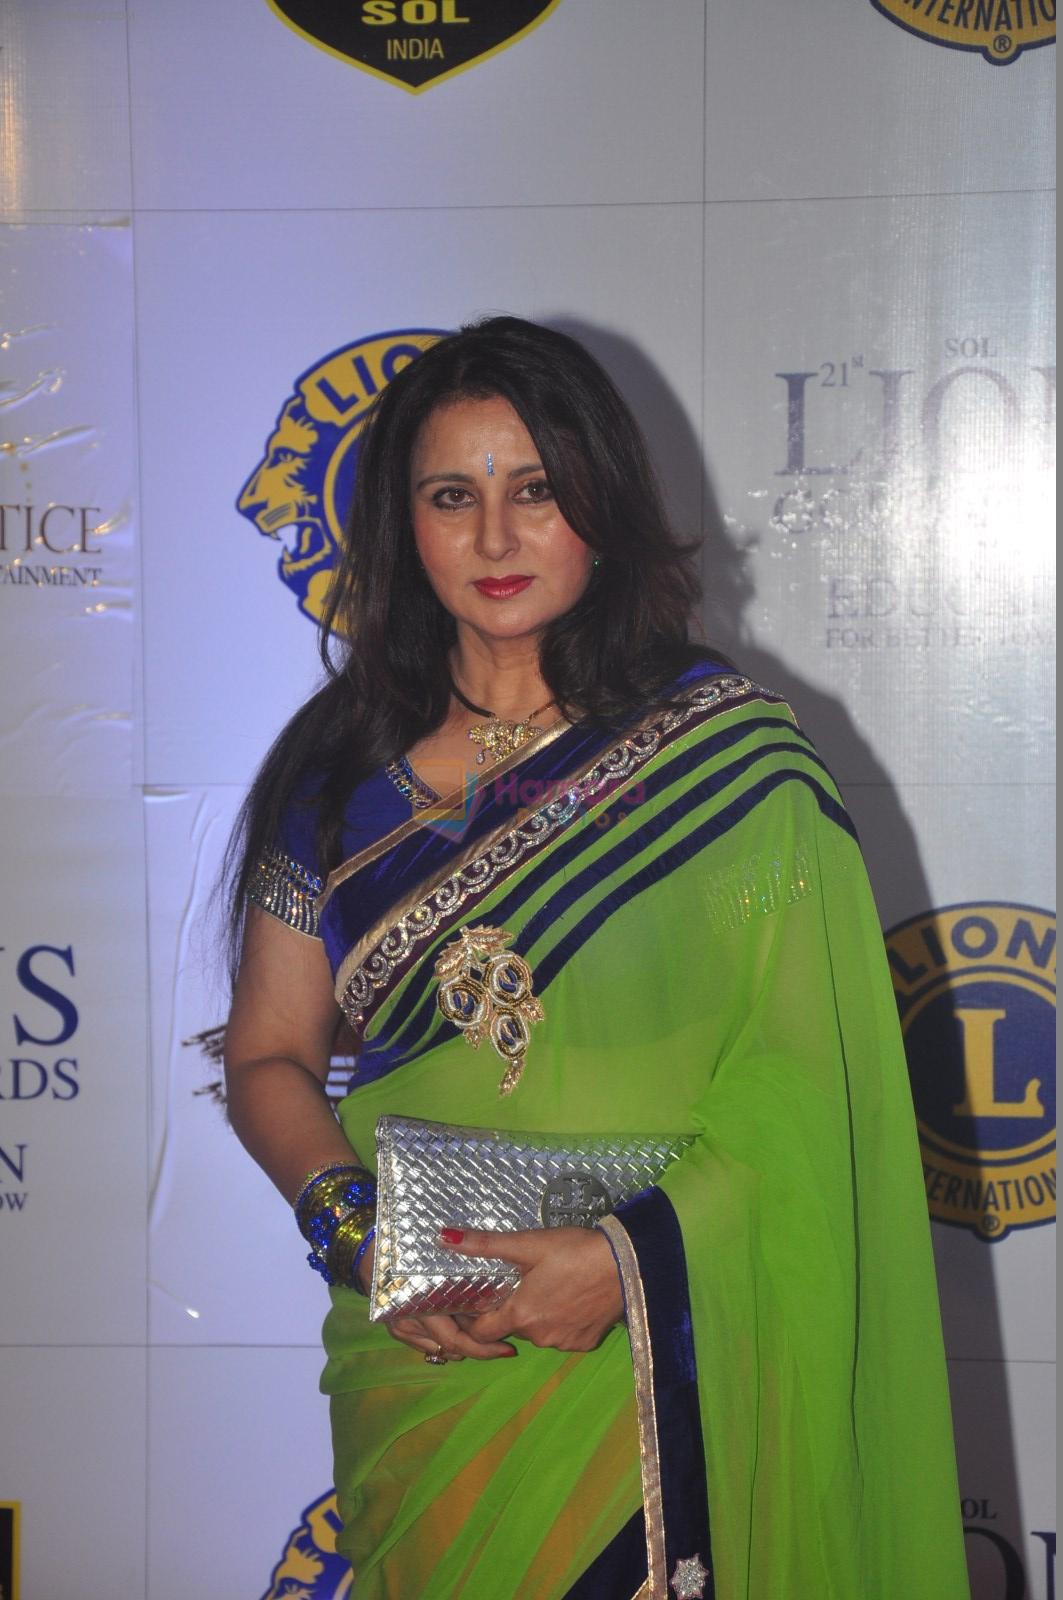 Poonam Dhillon at the 21st Lions Gold Awards 2015 in Mumbai on 6th Jan 2015